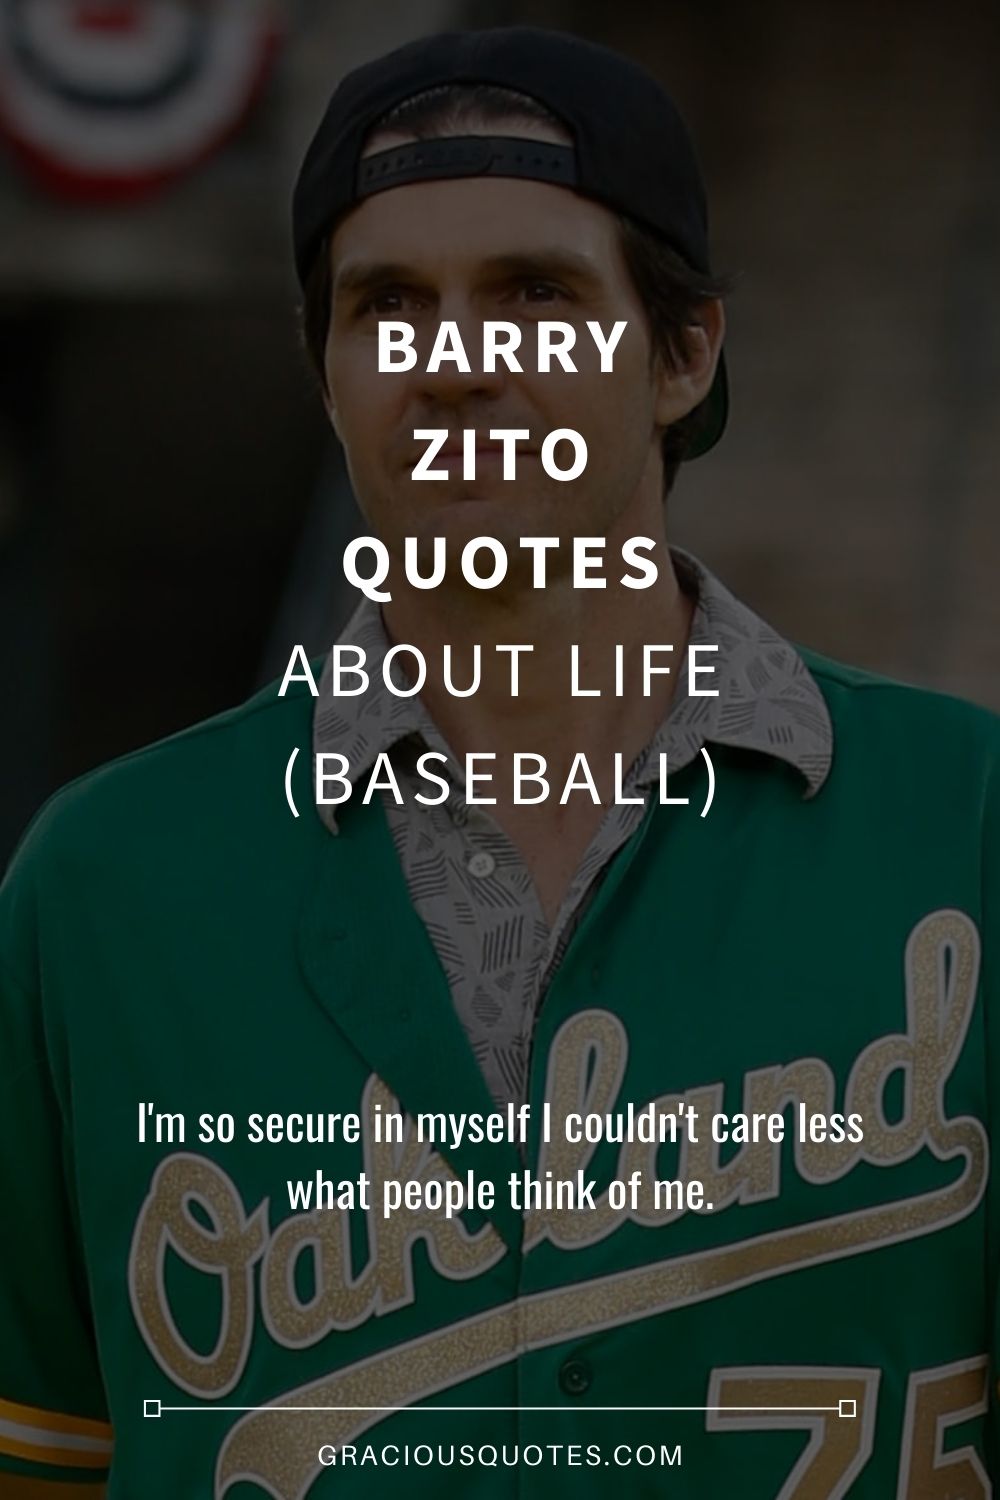 Barry Zito Quotes About Life (BASEBALL) - Gracious Quotes